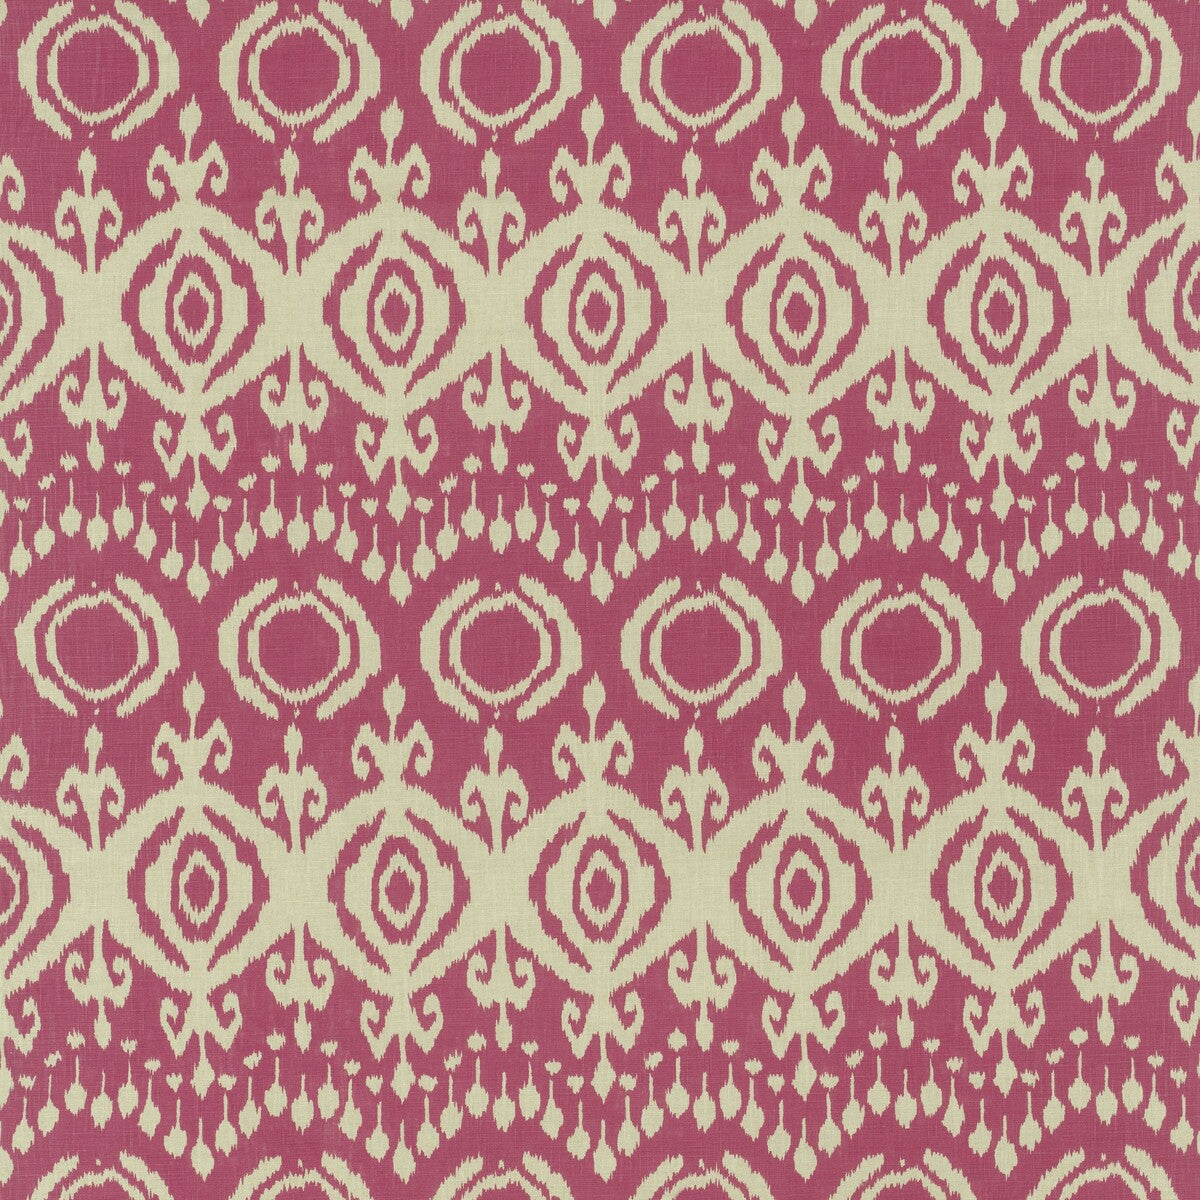 Volcano fabric in paradise color - pattern AM100290.7.0 - by Kravet Couture in the Andrew Martin Expedition collection